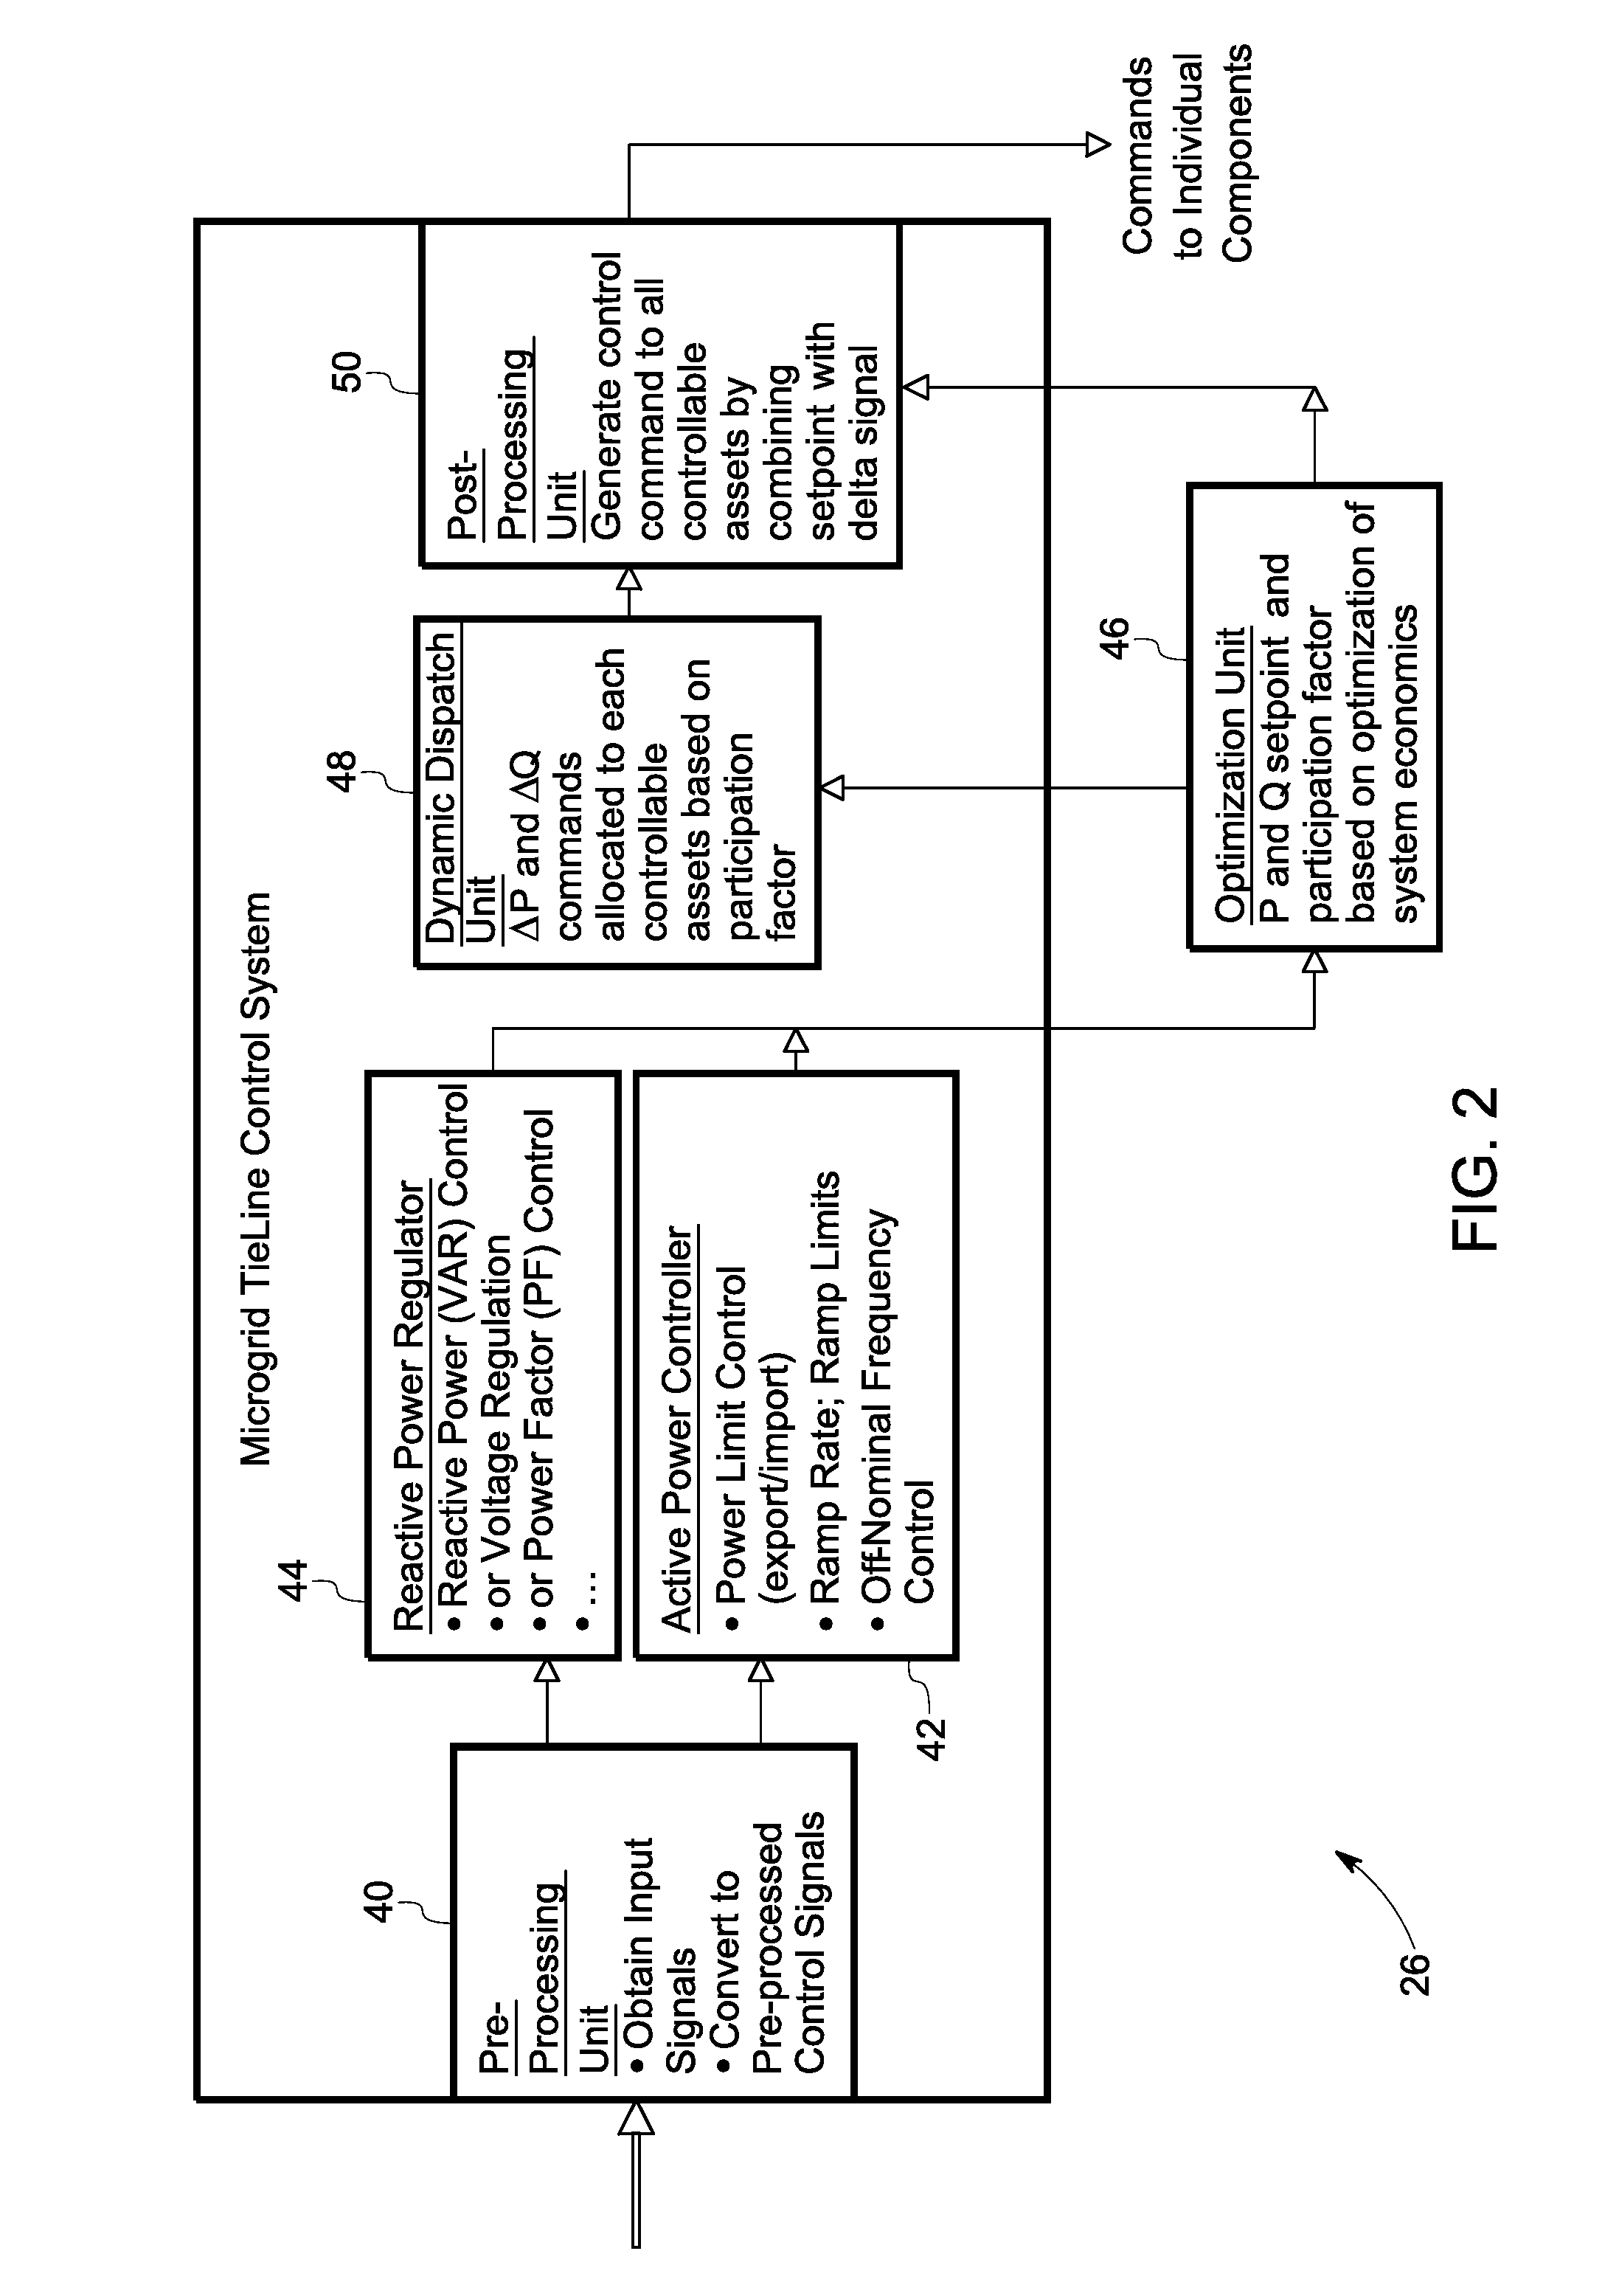 System and method for controlling microgrid